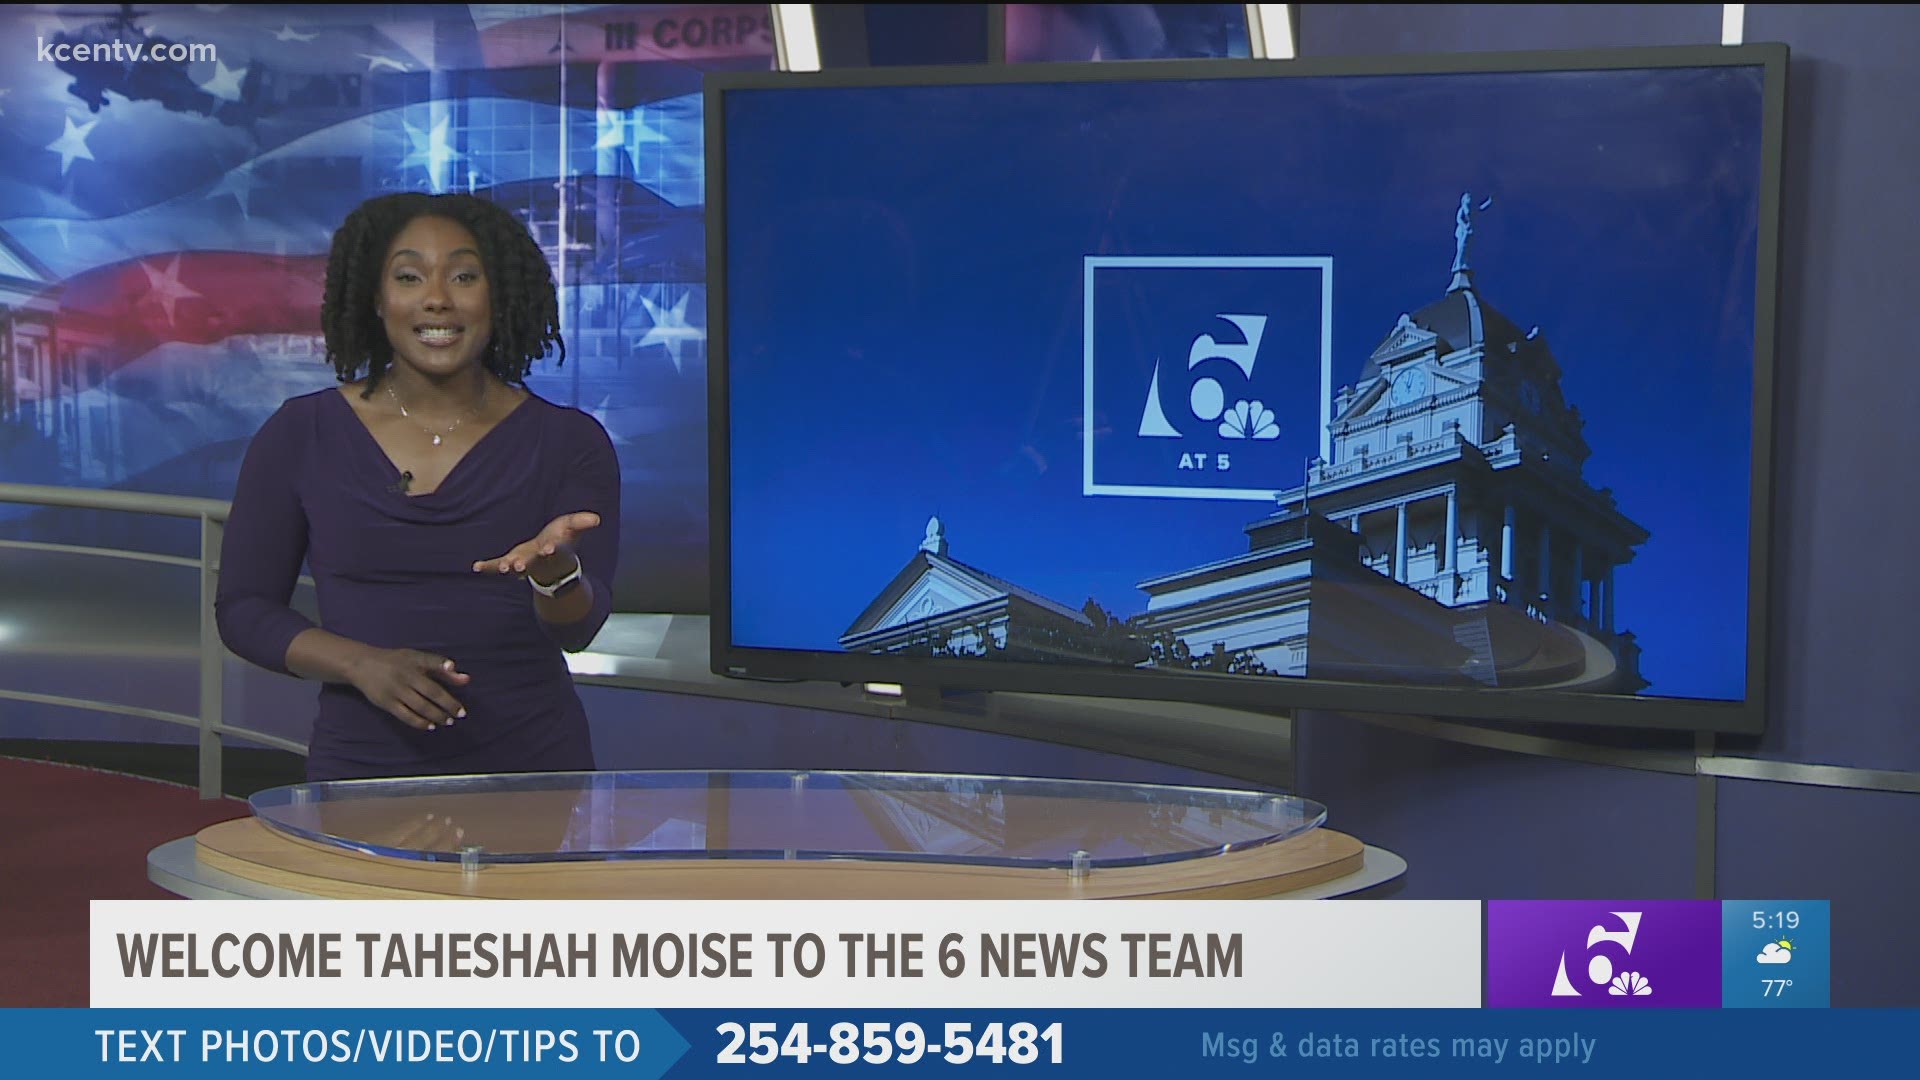 Taheshah Moise is joining the 6 News team! Please welcome her as she joins KCEN-TV!